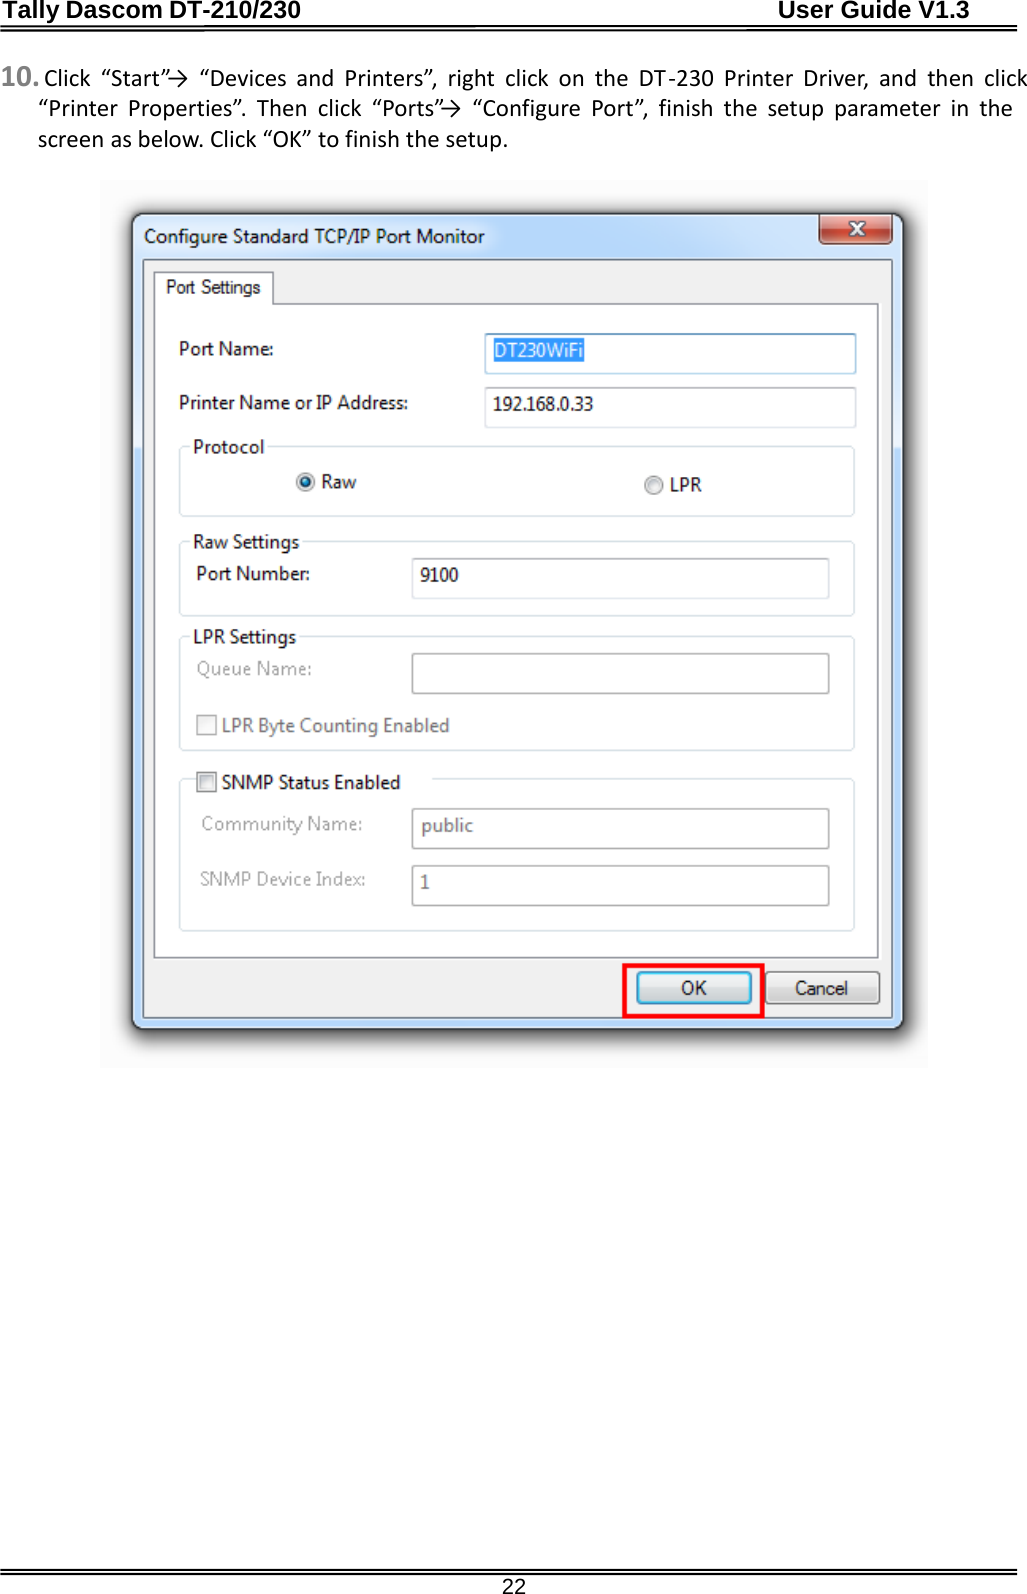 Tally Dascom DT-210/230                                      User Guide V1.3  22 10. Click “Start”→  “Devices  and  Printers”,  right  click  on  the  DT-230  Printer Driver, and then click “Printer Properties”. Then click “Ports” →  “Configure  Port”,  finish  the  setup  parameter  in  the screen as below. Click “OK” to finish the setup.                        